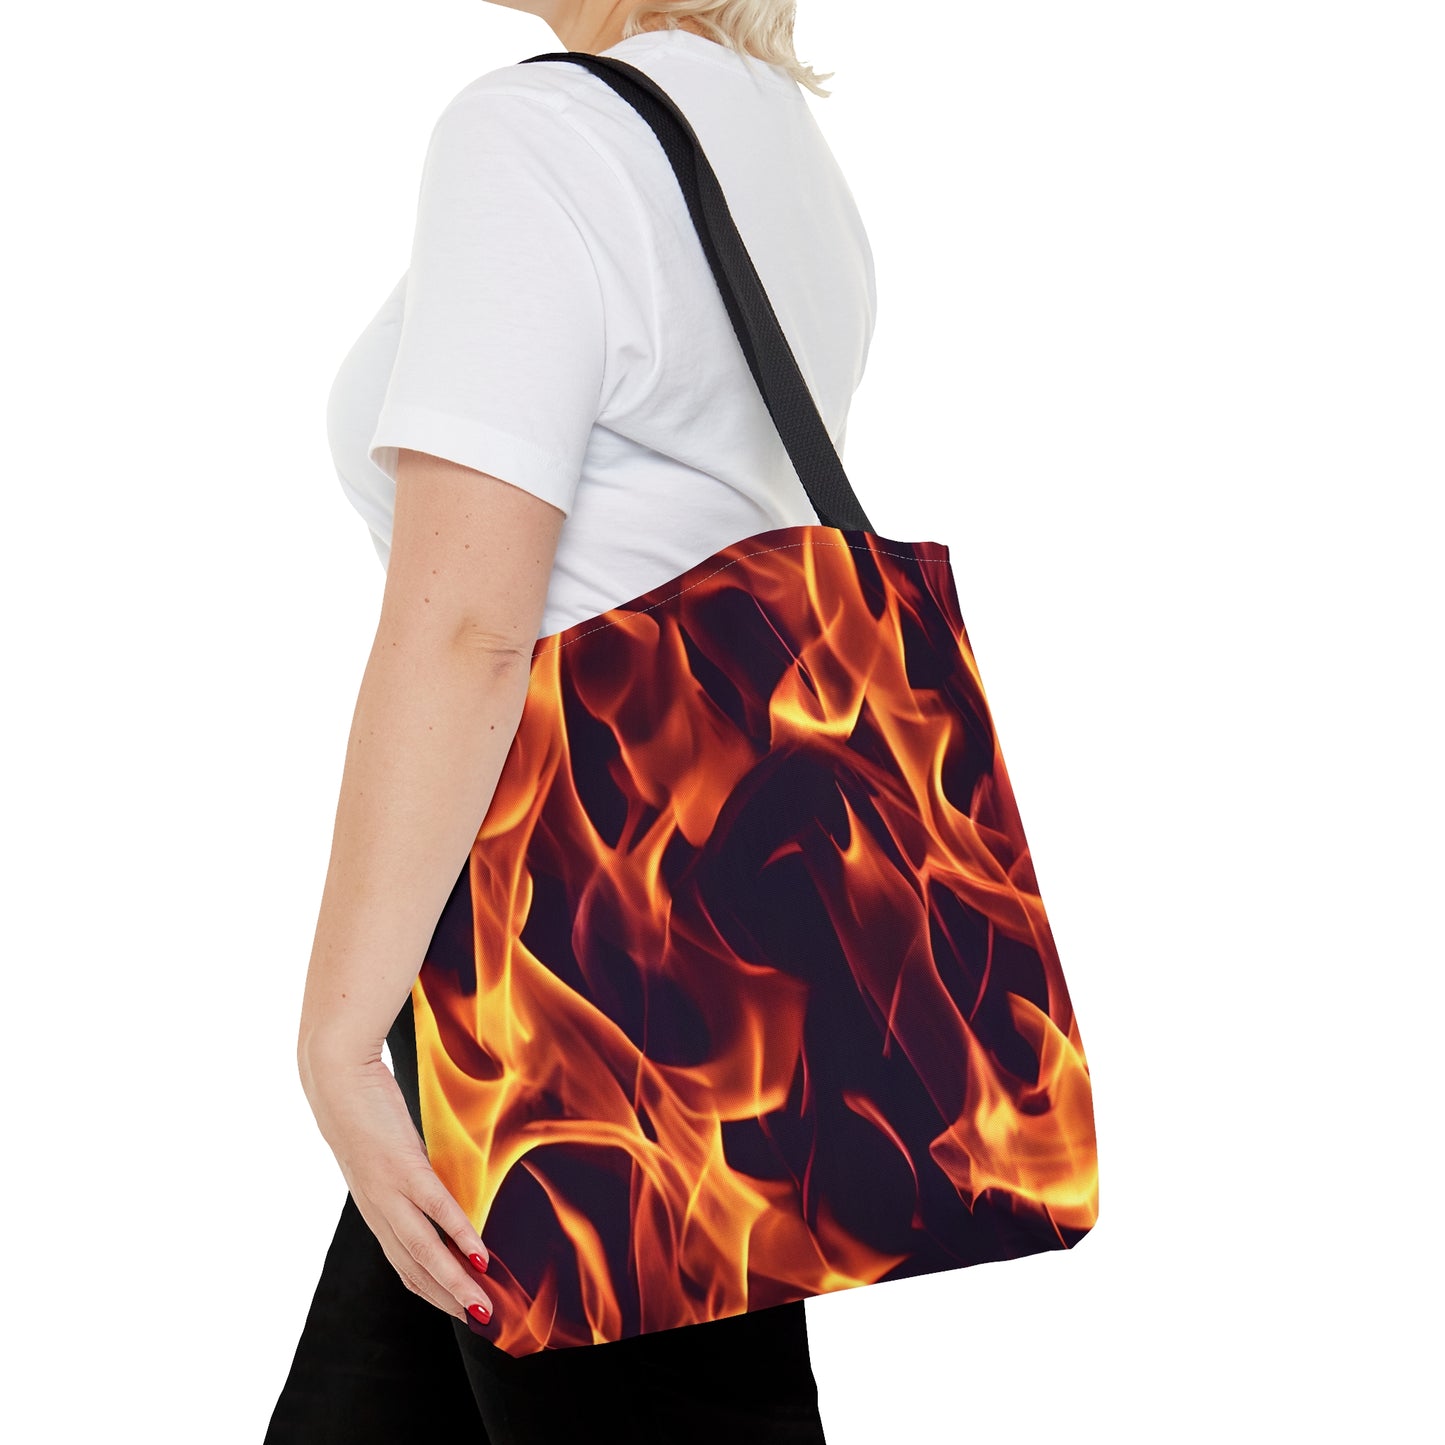 Flames Unleashed: Realistic All Over Print Tote Bag